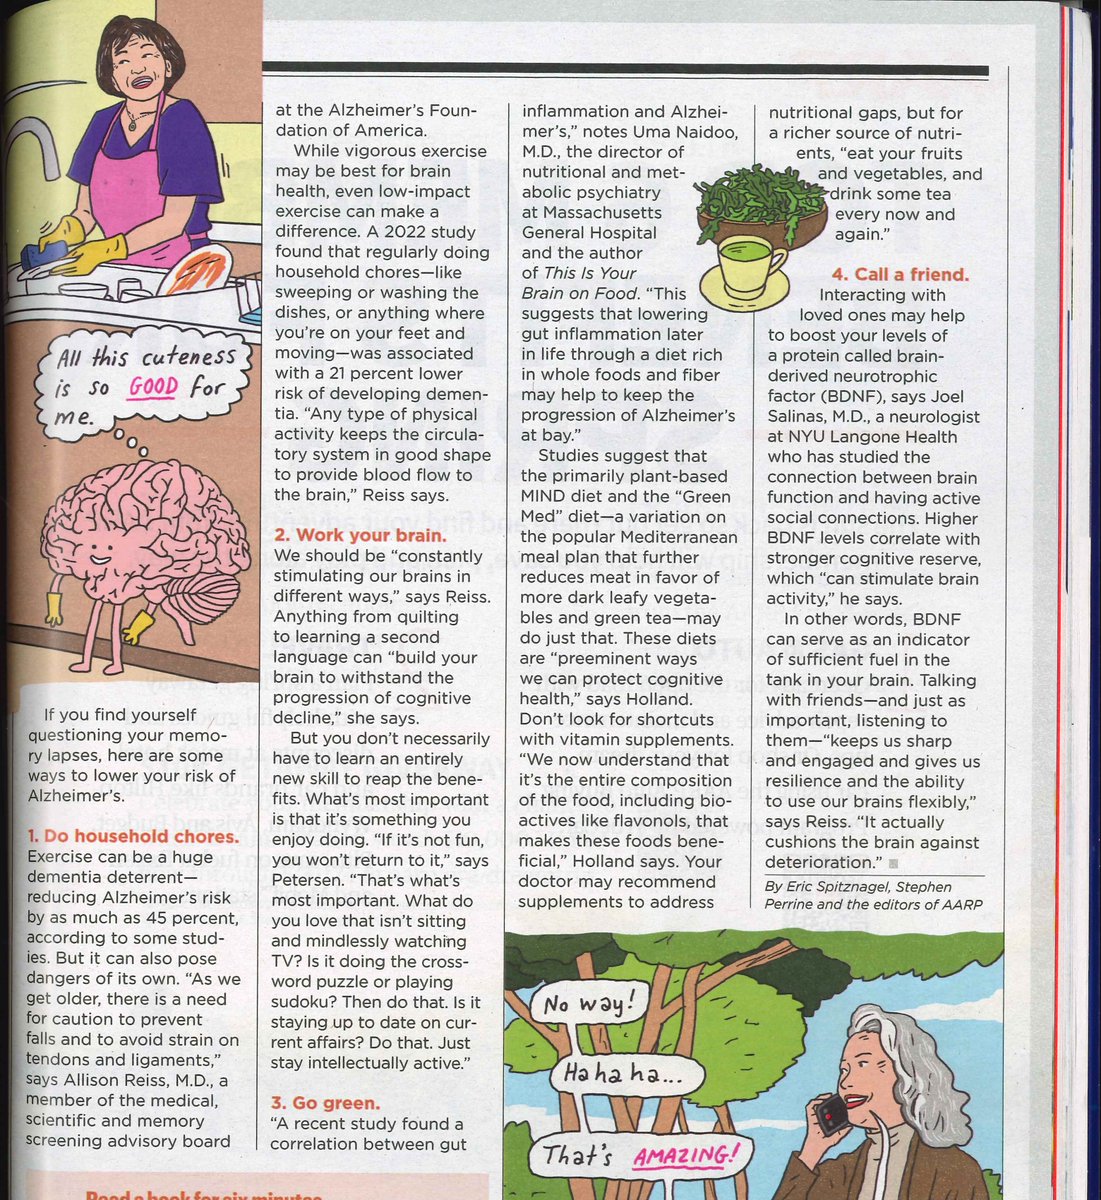 My #comments on #HealthyChoices for #brainhealh #Alzheimers #diet #exercise #featured in @AARP magazine. @alzfdn @AFMResearch @MDPIOpenAccess @MdpiMedicina @FrontNeurosci @NYULH_DeptofMed @NYULangoneLI @nyulisom @nyulangone @ReDLat_Dementia